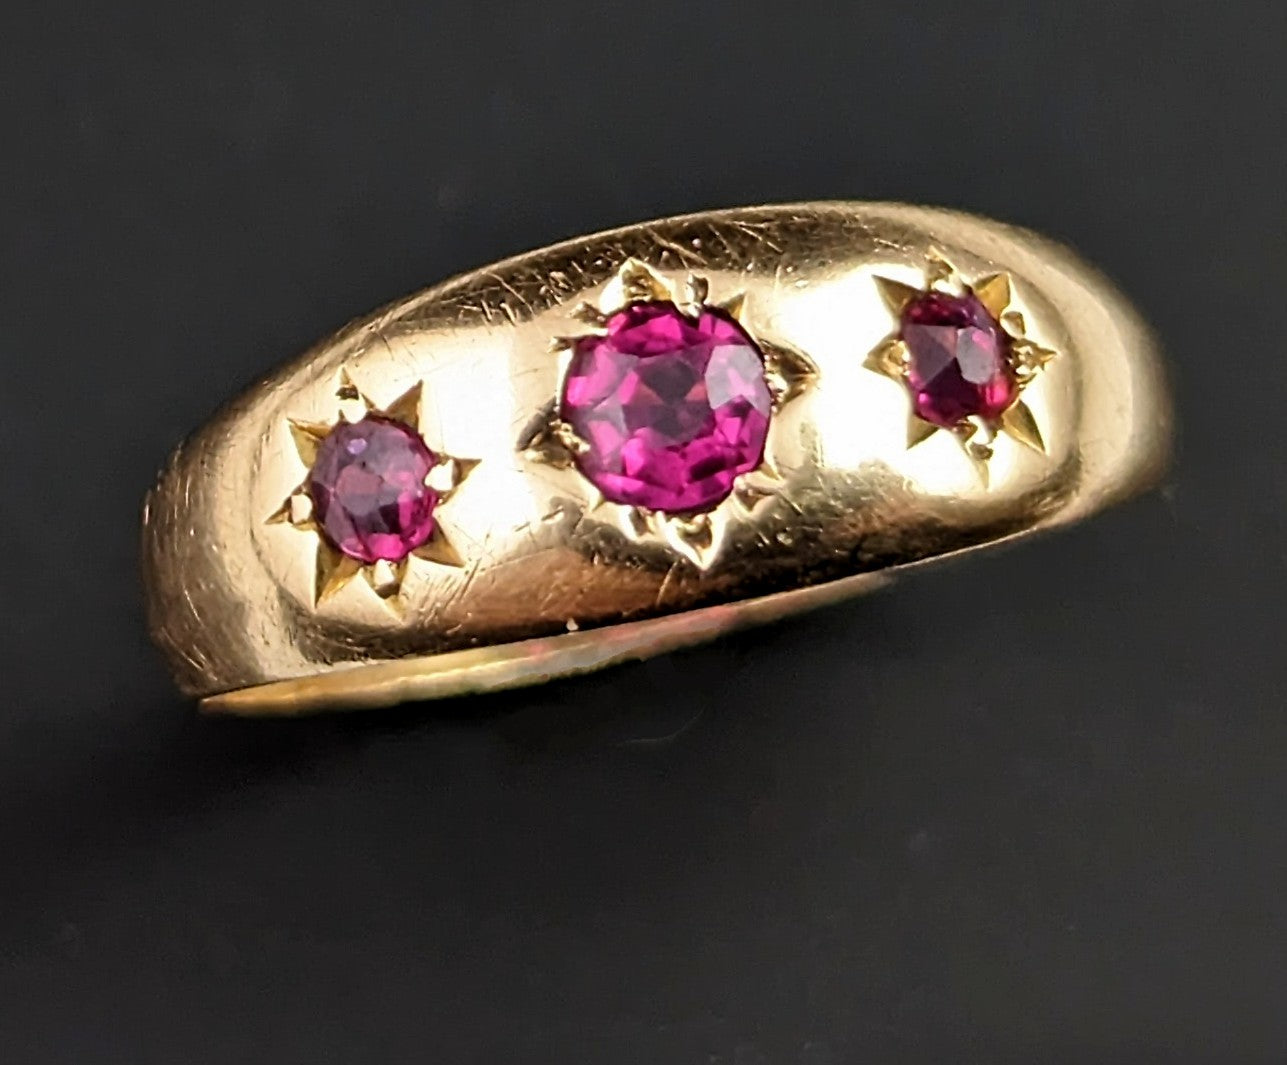 Antique Ruby Gypsy set ring, 18ct yellow gold, Victorian